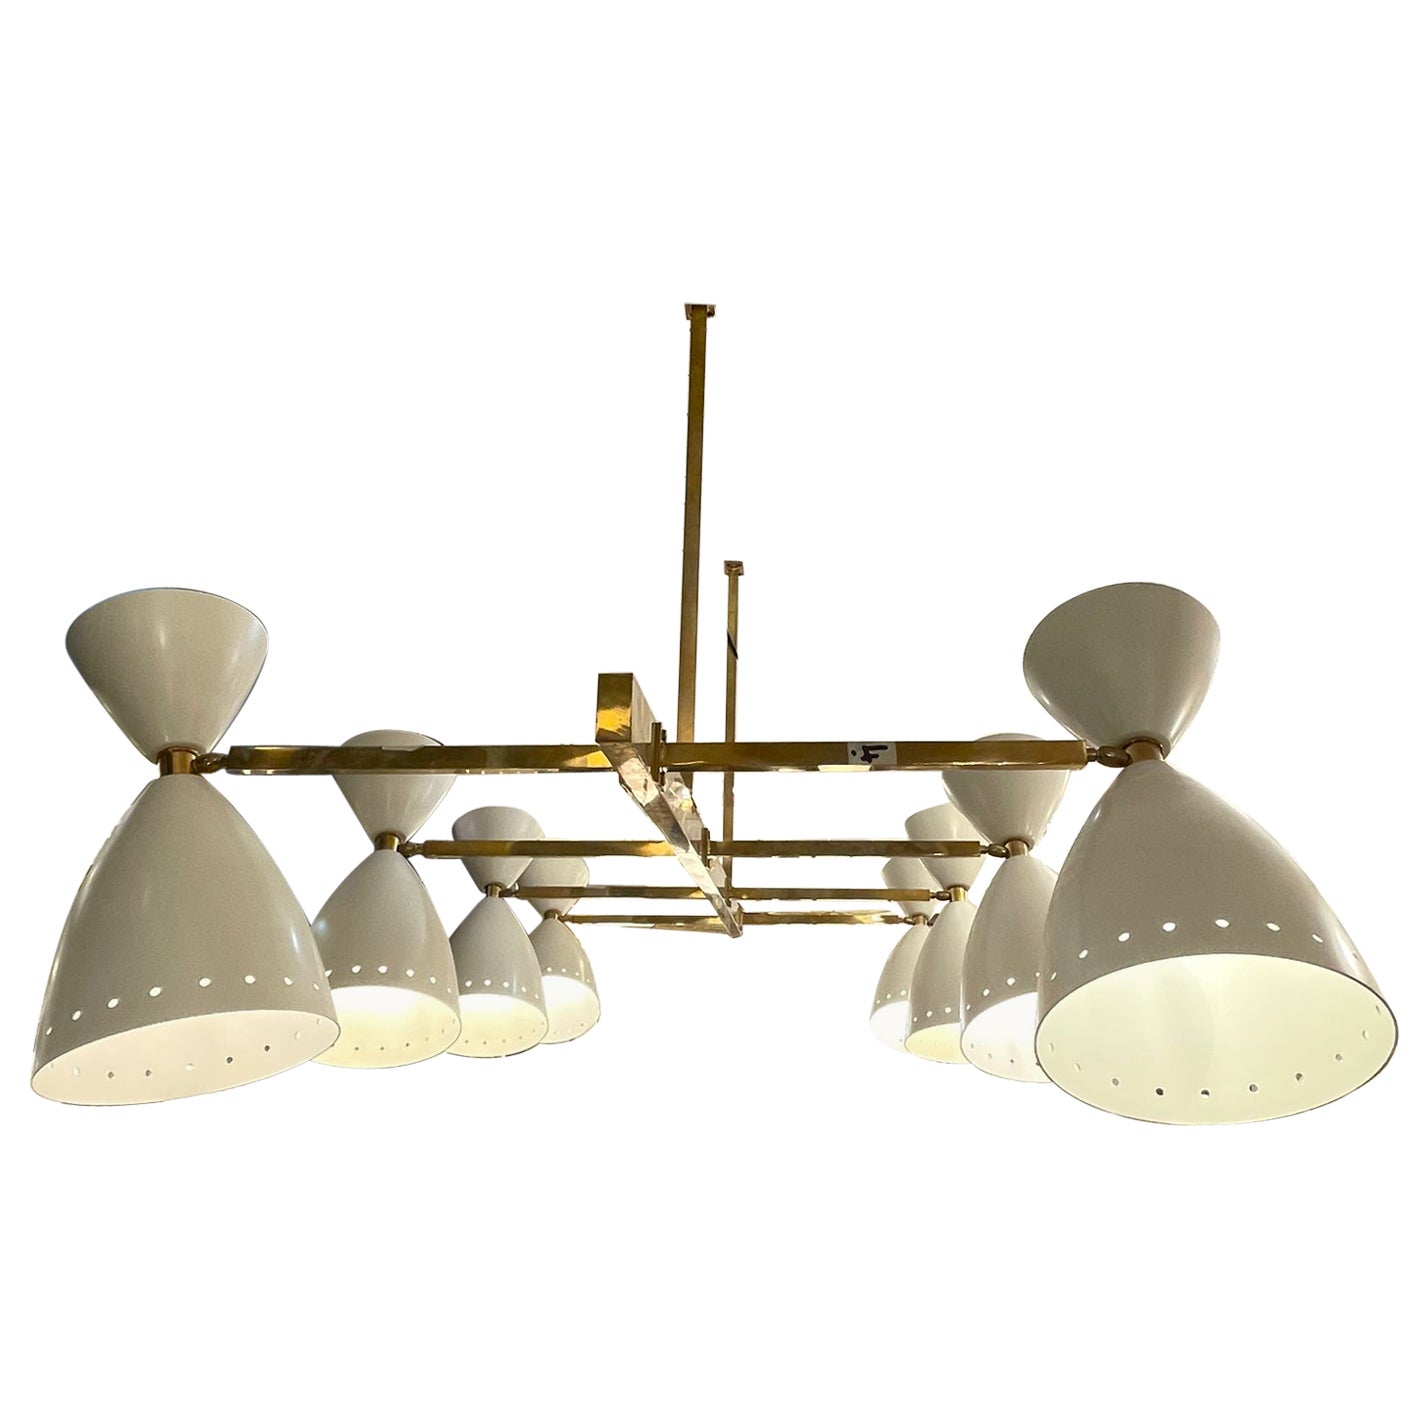 Italian Modernist Chandelier in Brass with Ivory Shades For Sale